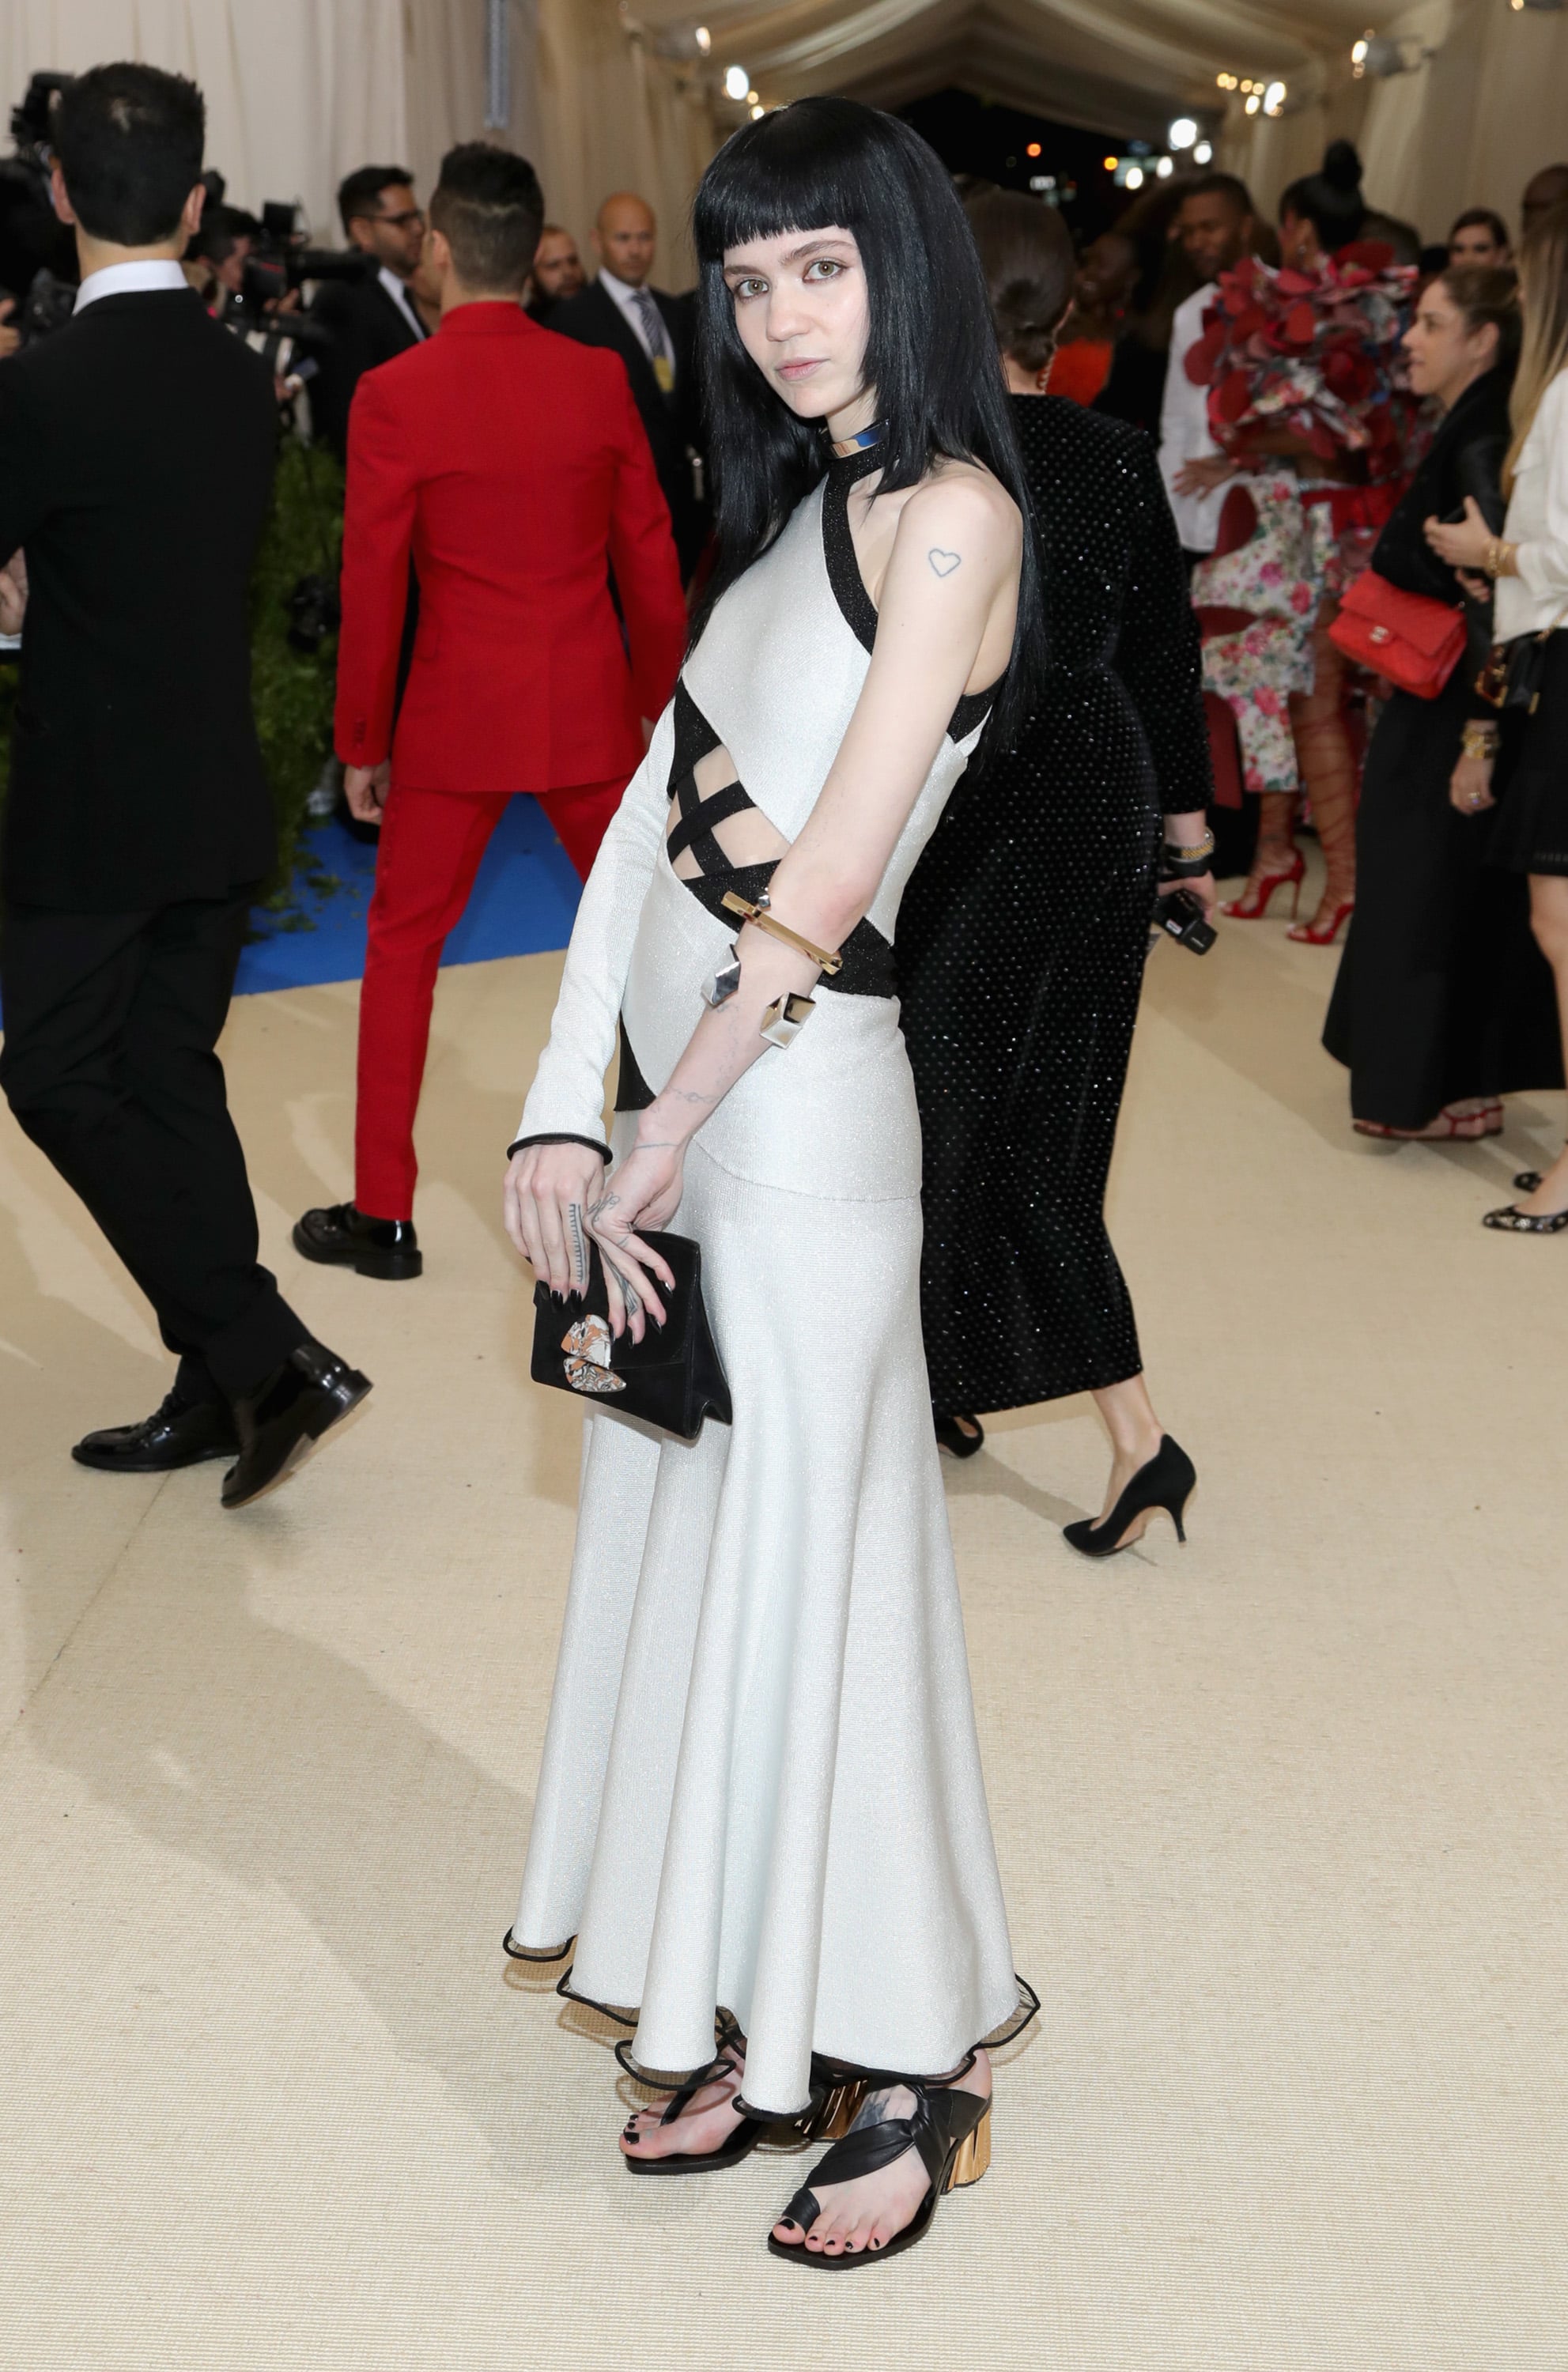 Grimes | The Best Met Gala Looks From 2017 Get You Ready For This Year's Red Carpet | POPSUGAR Fashion Photo 111